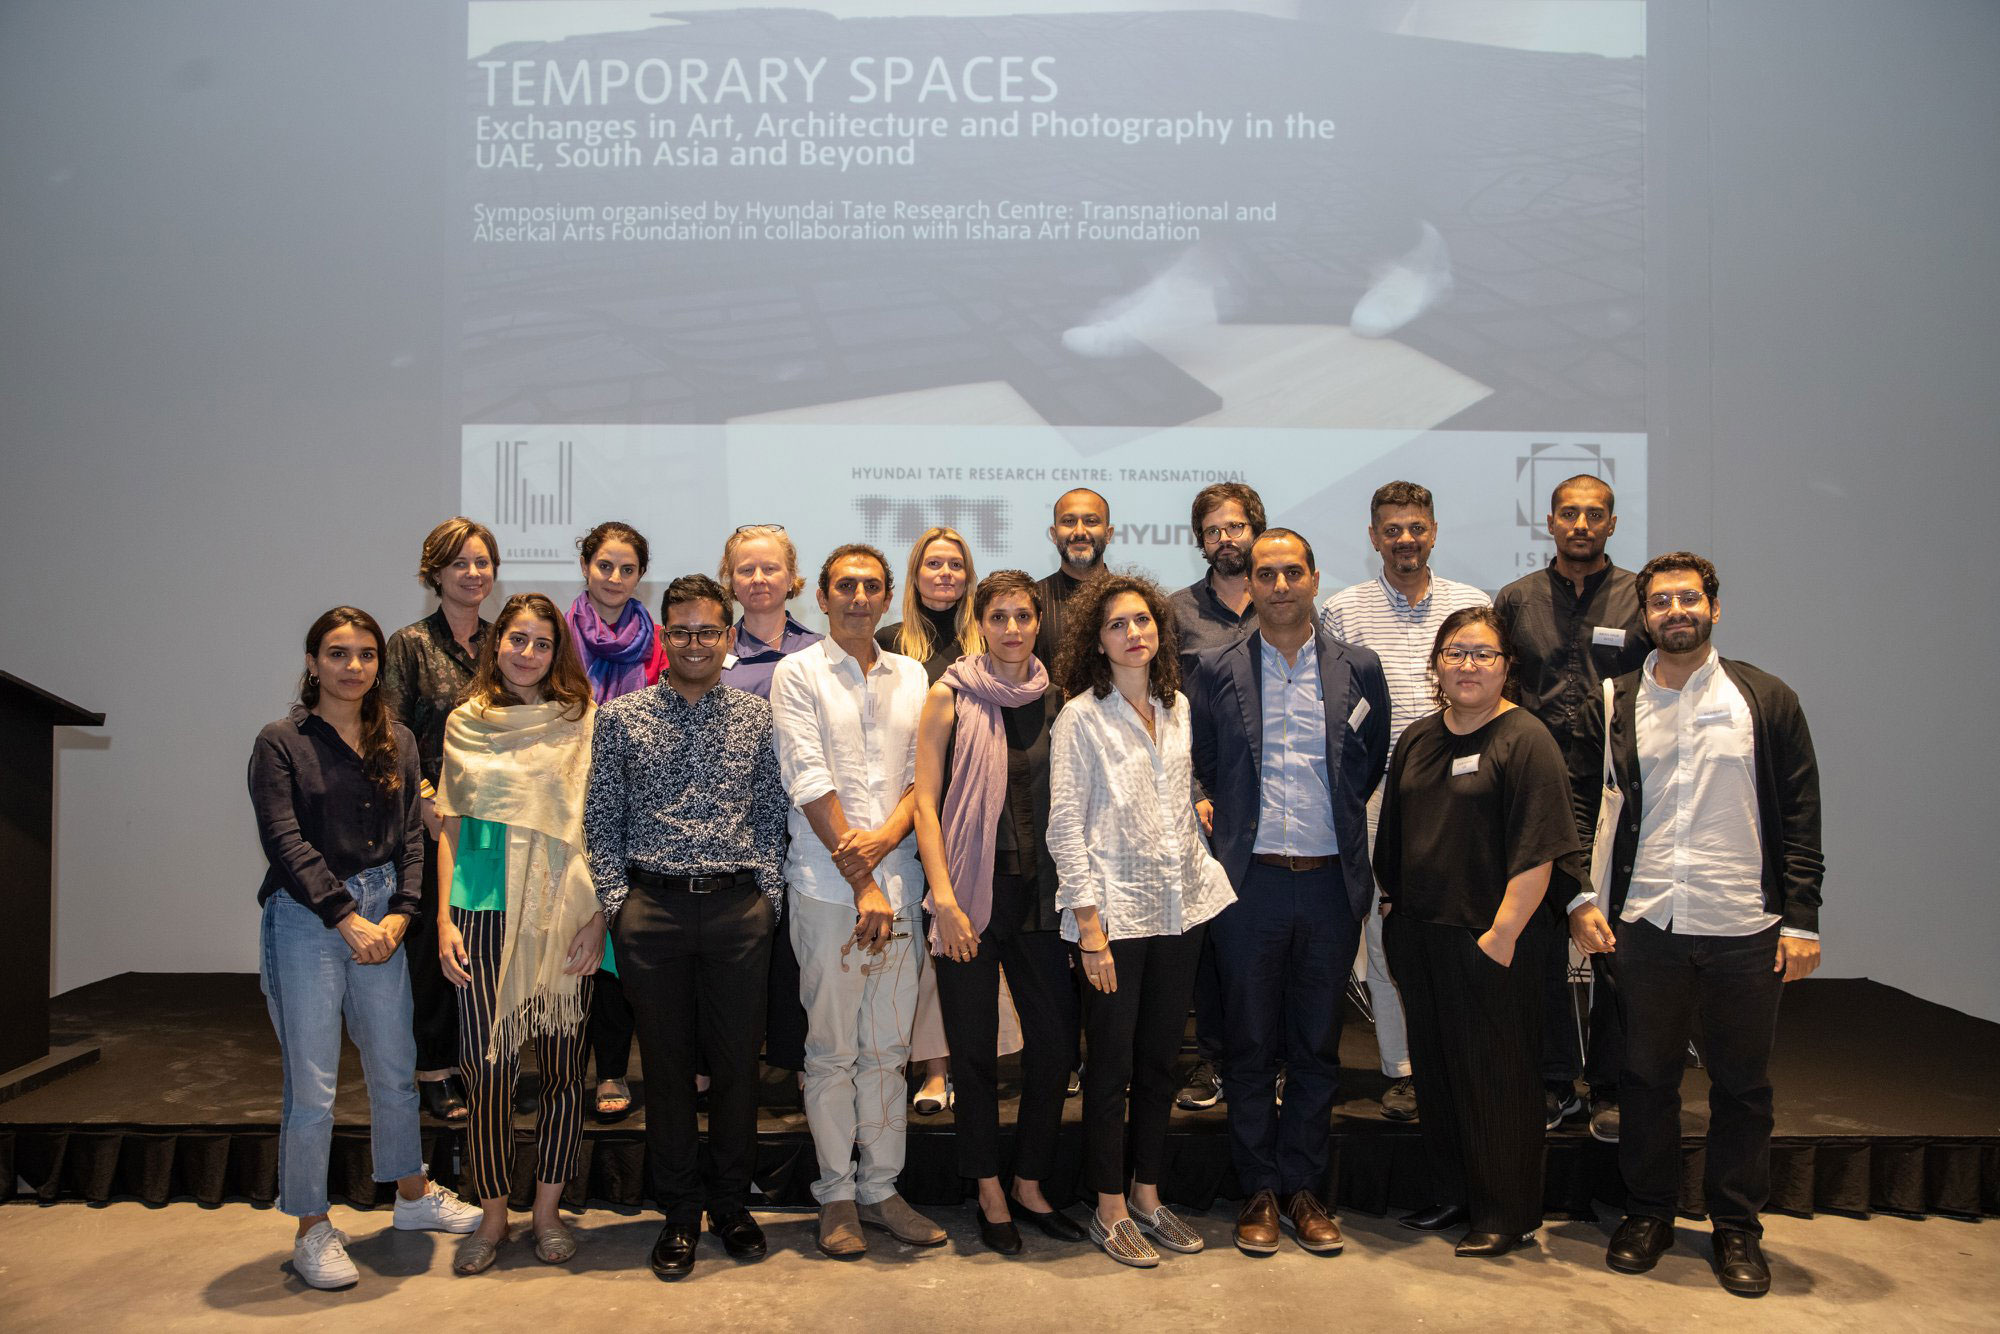 The contributors of the ‘Temporary Spaces’ symposium at the Alserkal Arts Foundation Project Space in Dubai on 1 November 2019